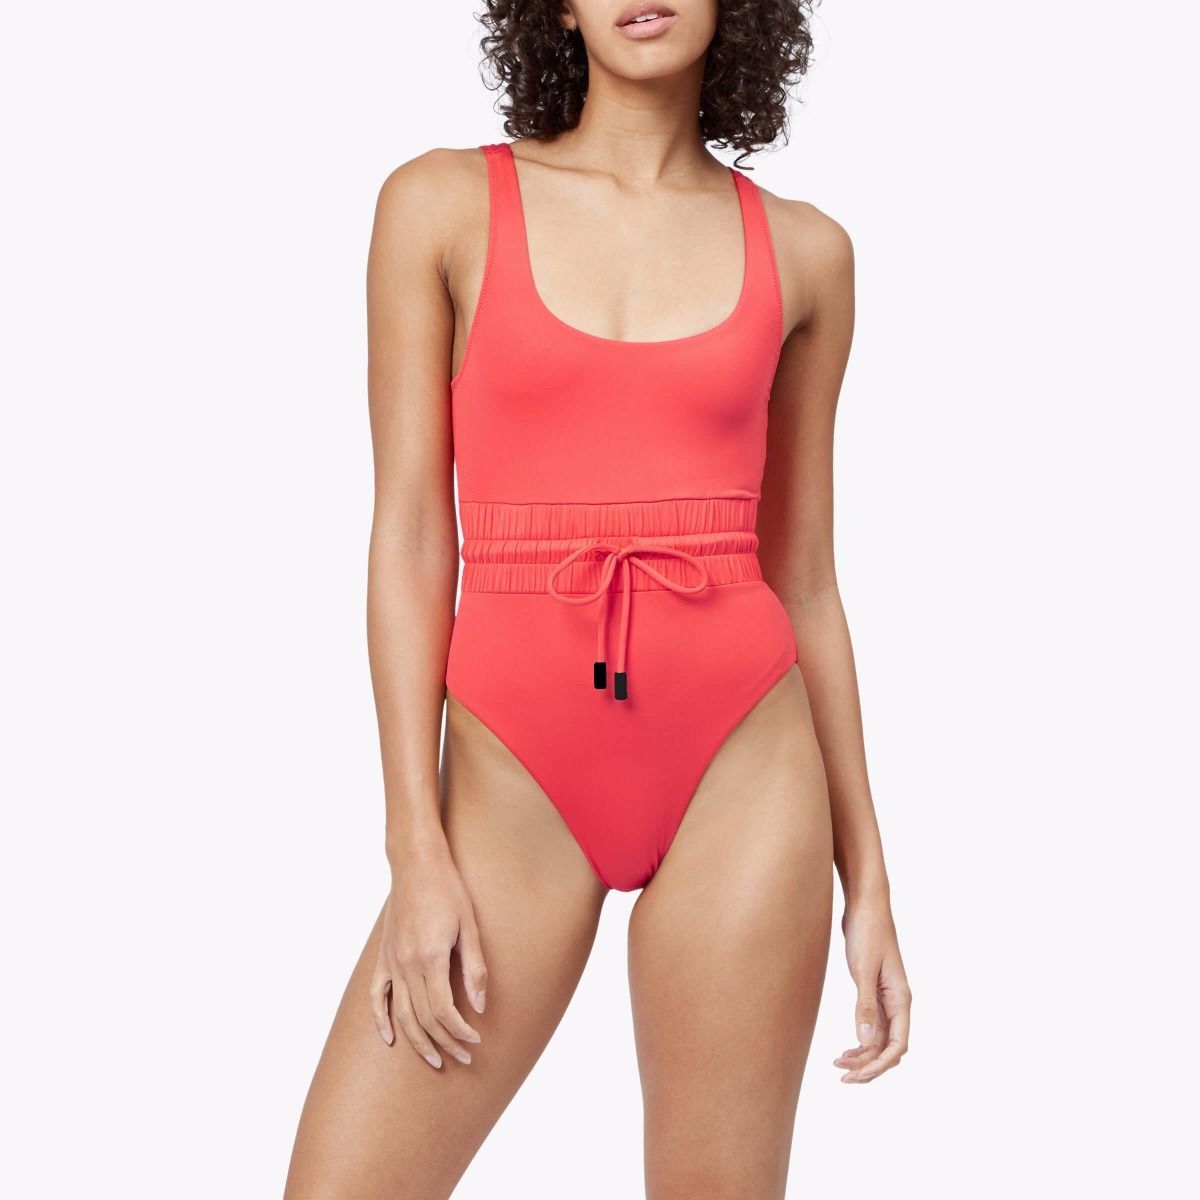 8 Newly Launched Swim Brands To Keep You Ahead Of The Game